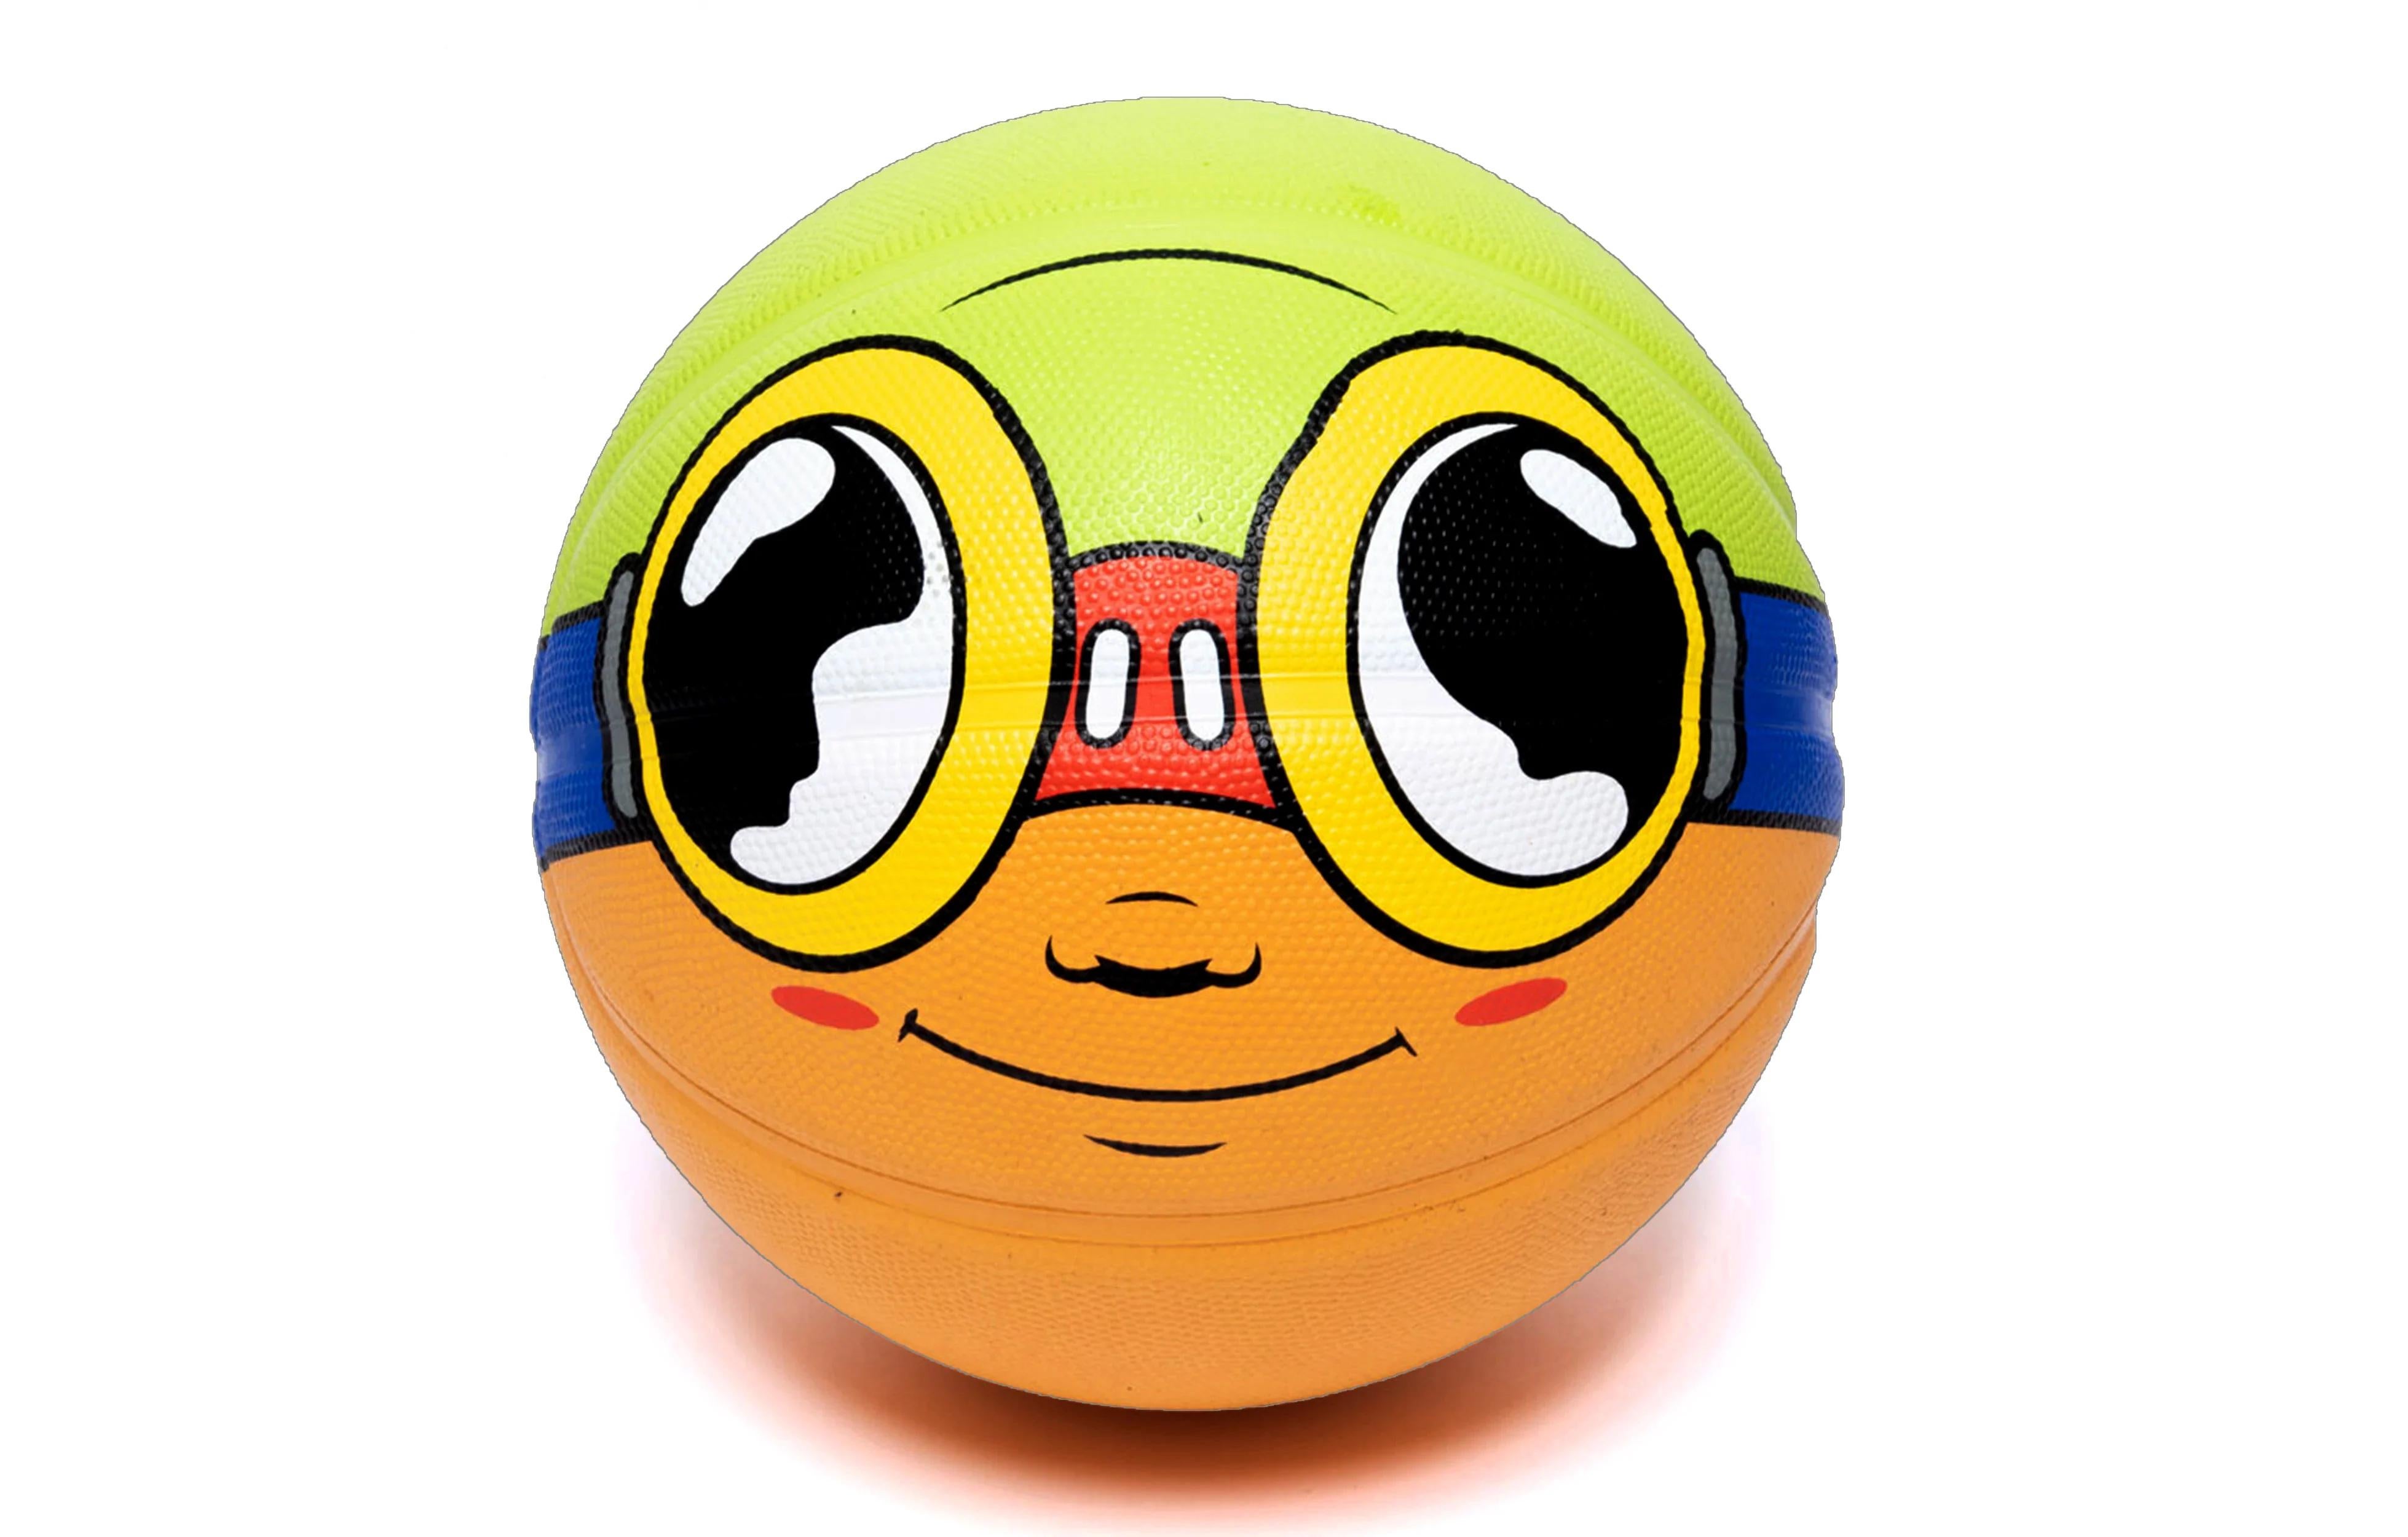 Flyboy Basketball by Hebru Brantley
Hebru x Wilson Basketball
Limited quantity run, back by popular demand, sold exclusively by Wilson
Designed in Collaboration with Hebru Brantley
Featuring Hebru Brantley's Iconic Flyboy Character
All Surface